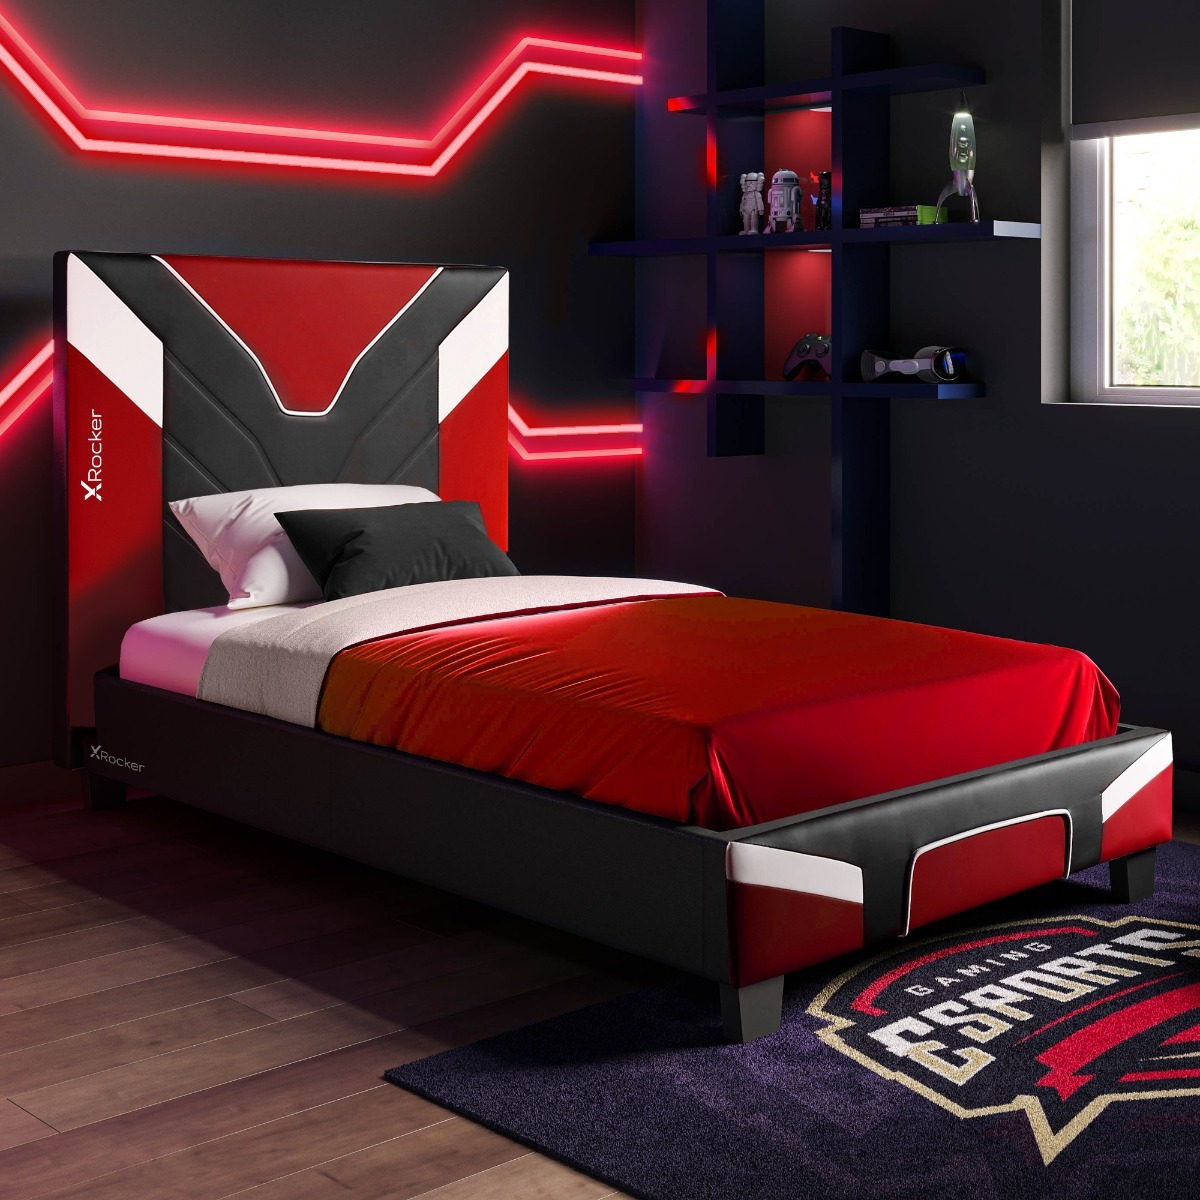 X Rocker Cerberus MKII Gaming Bed In A Box Red - image 1